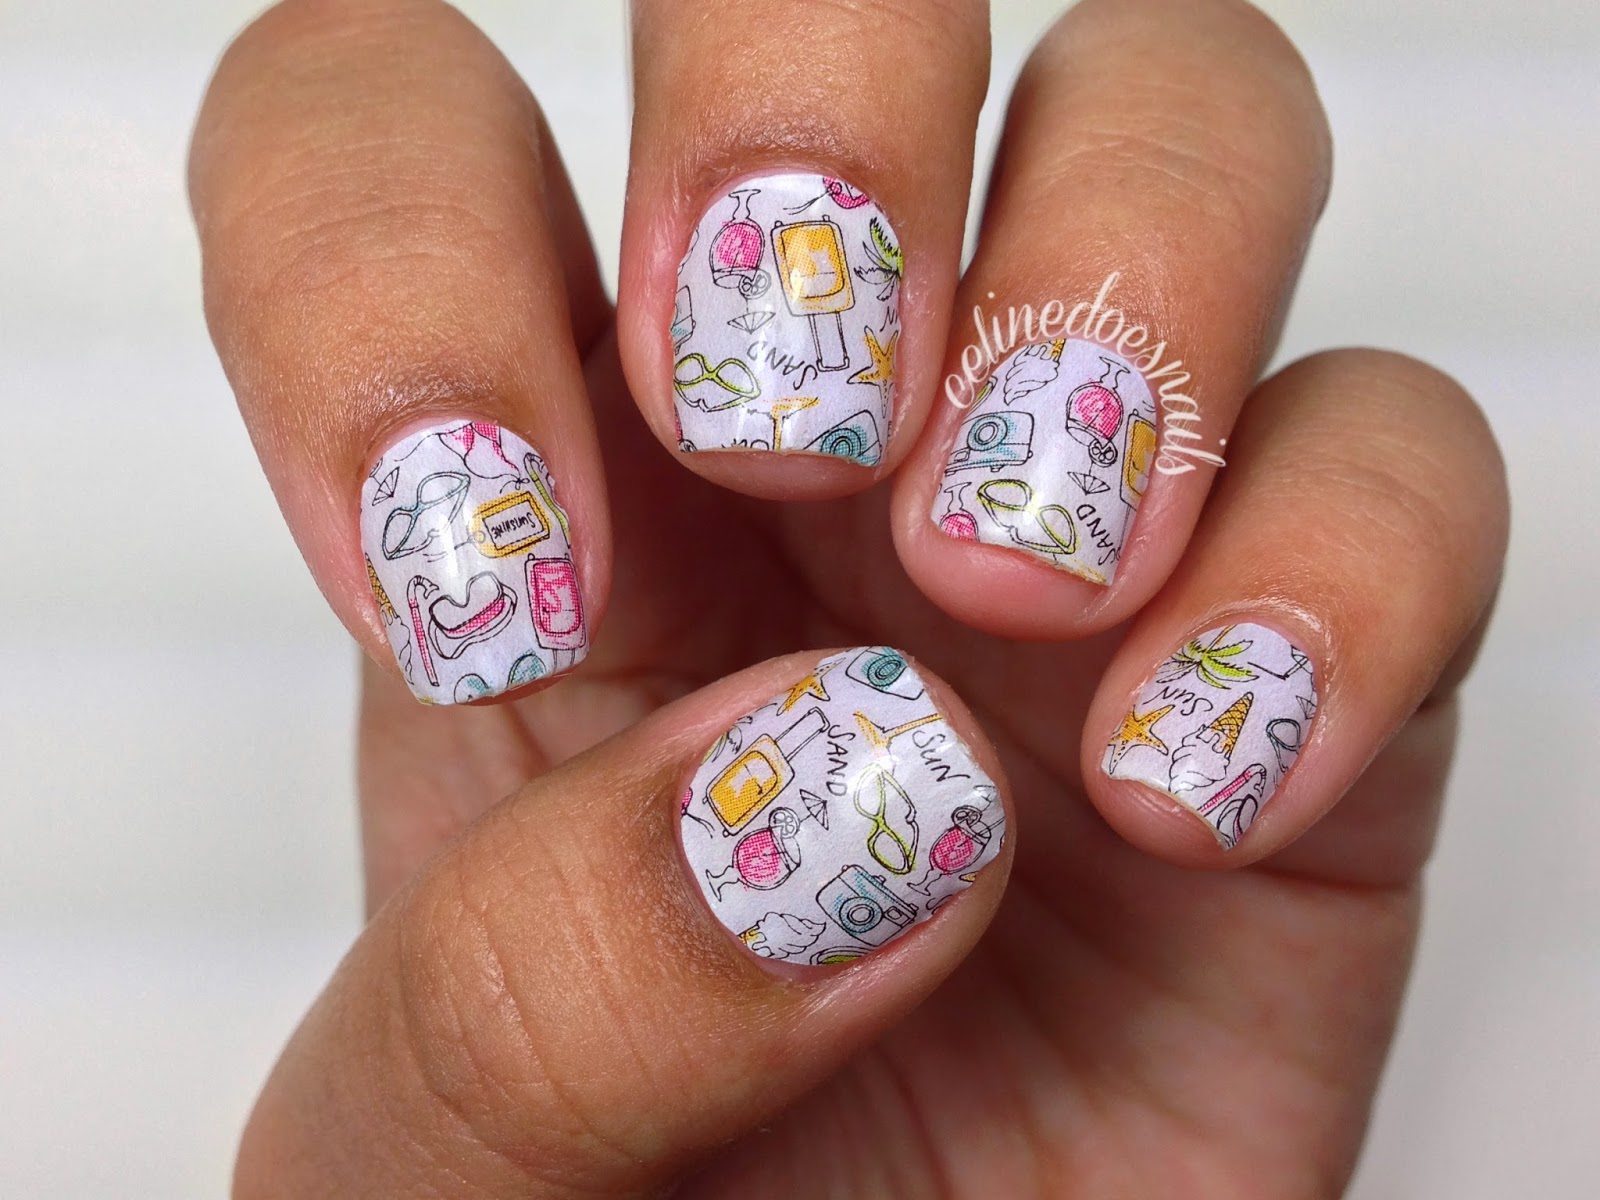 3. Disney-themed nail wraps at Jamberry in Midtown - wide 1